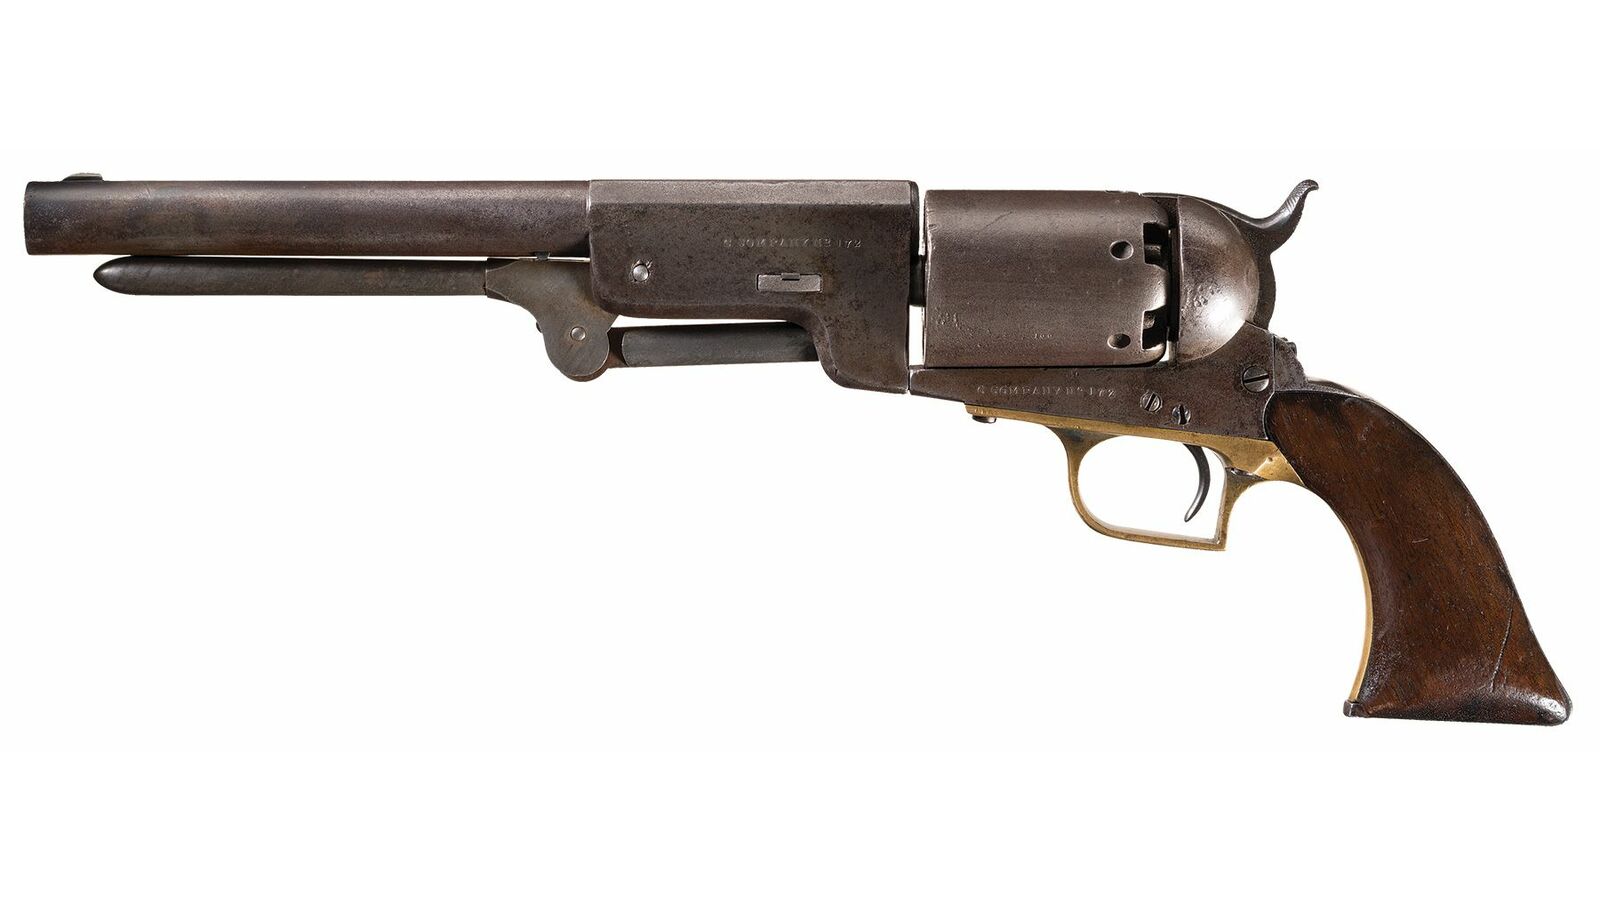 Historical and Rare Walker's C Company Marked U.S. Contract Colt 